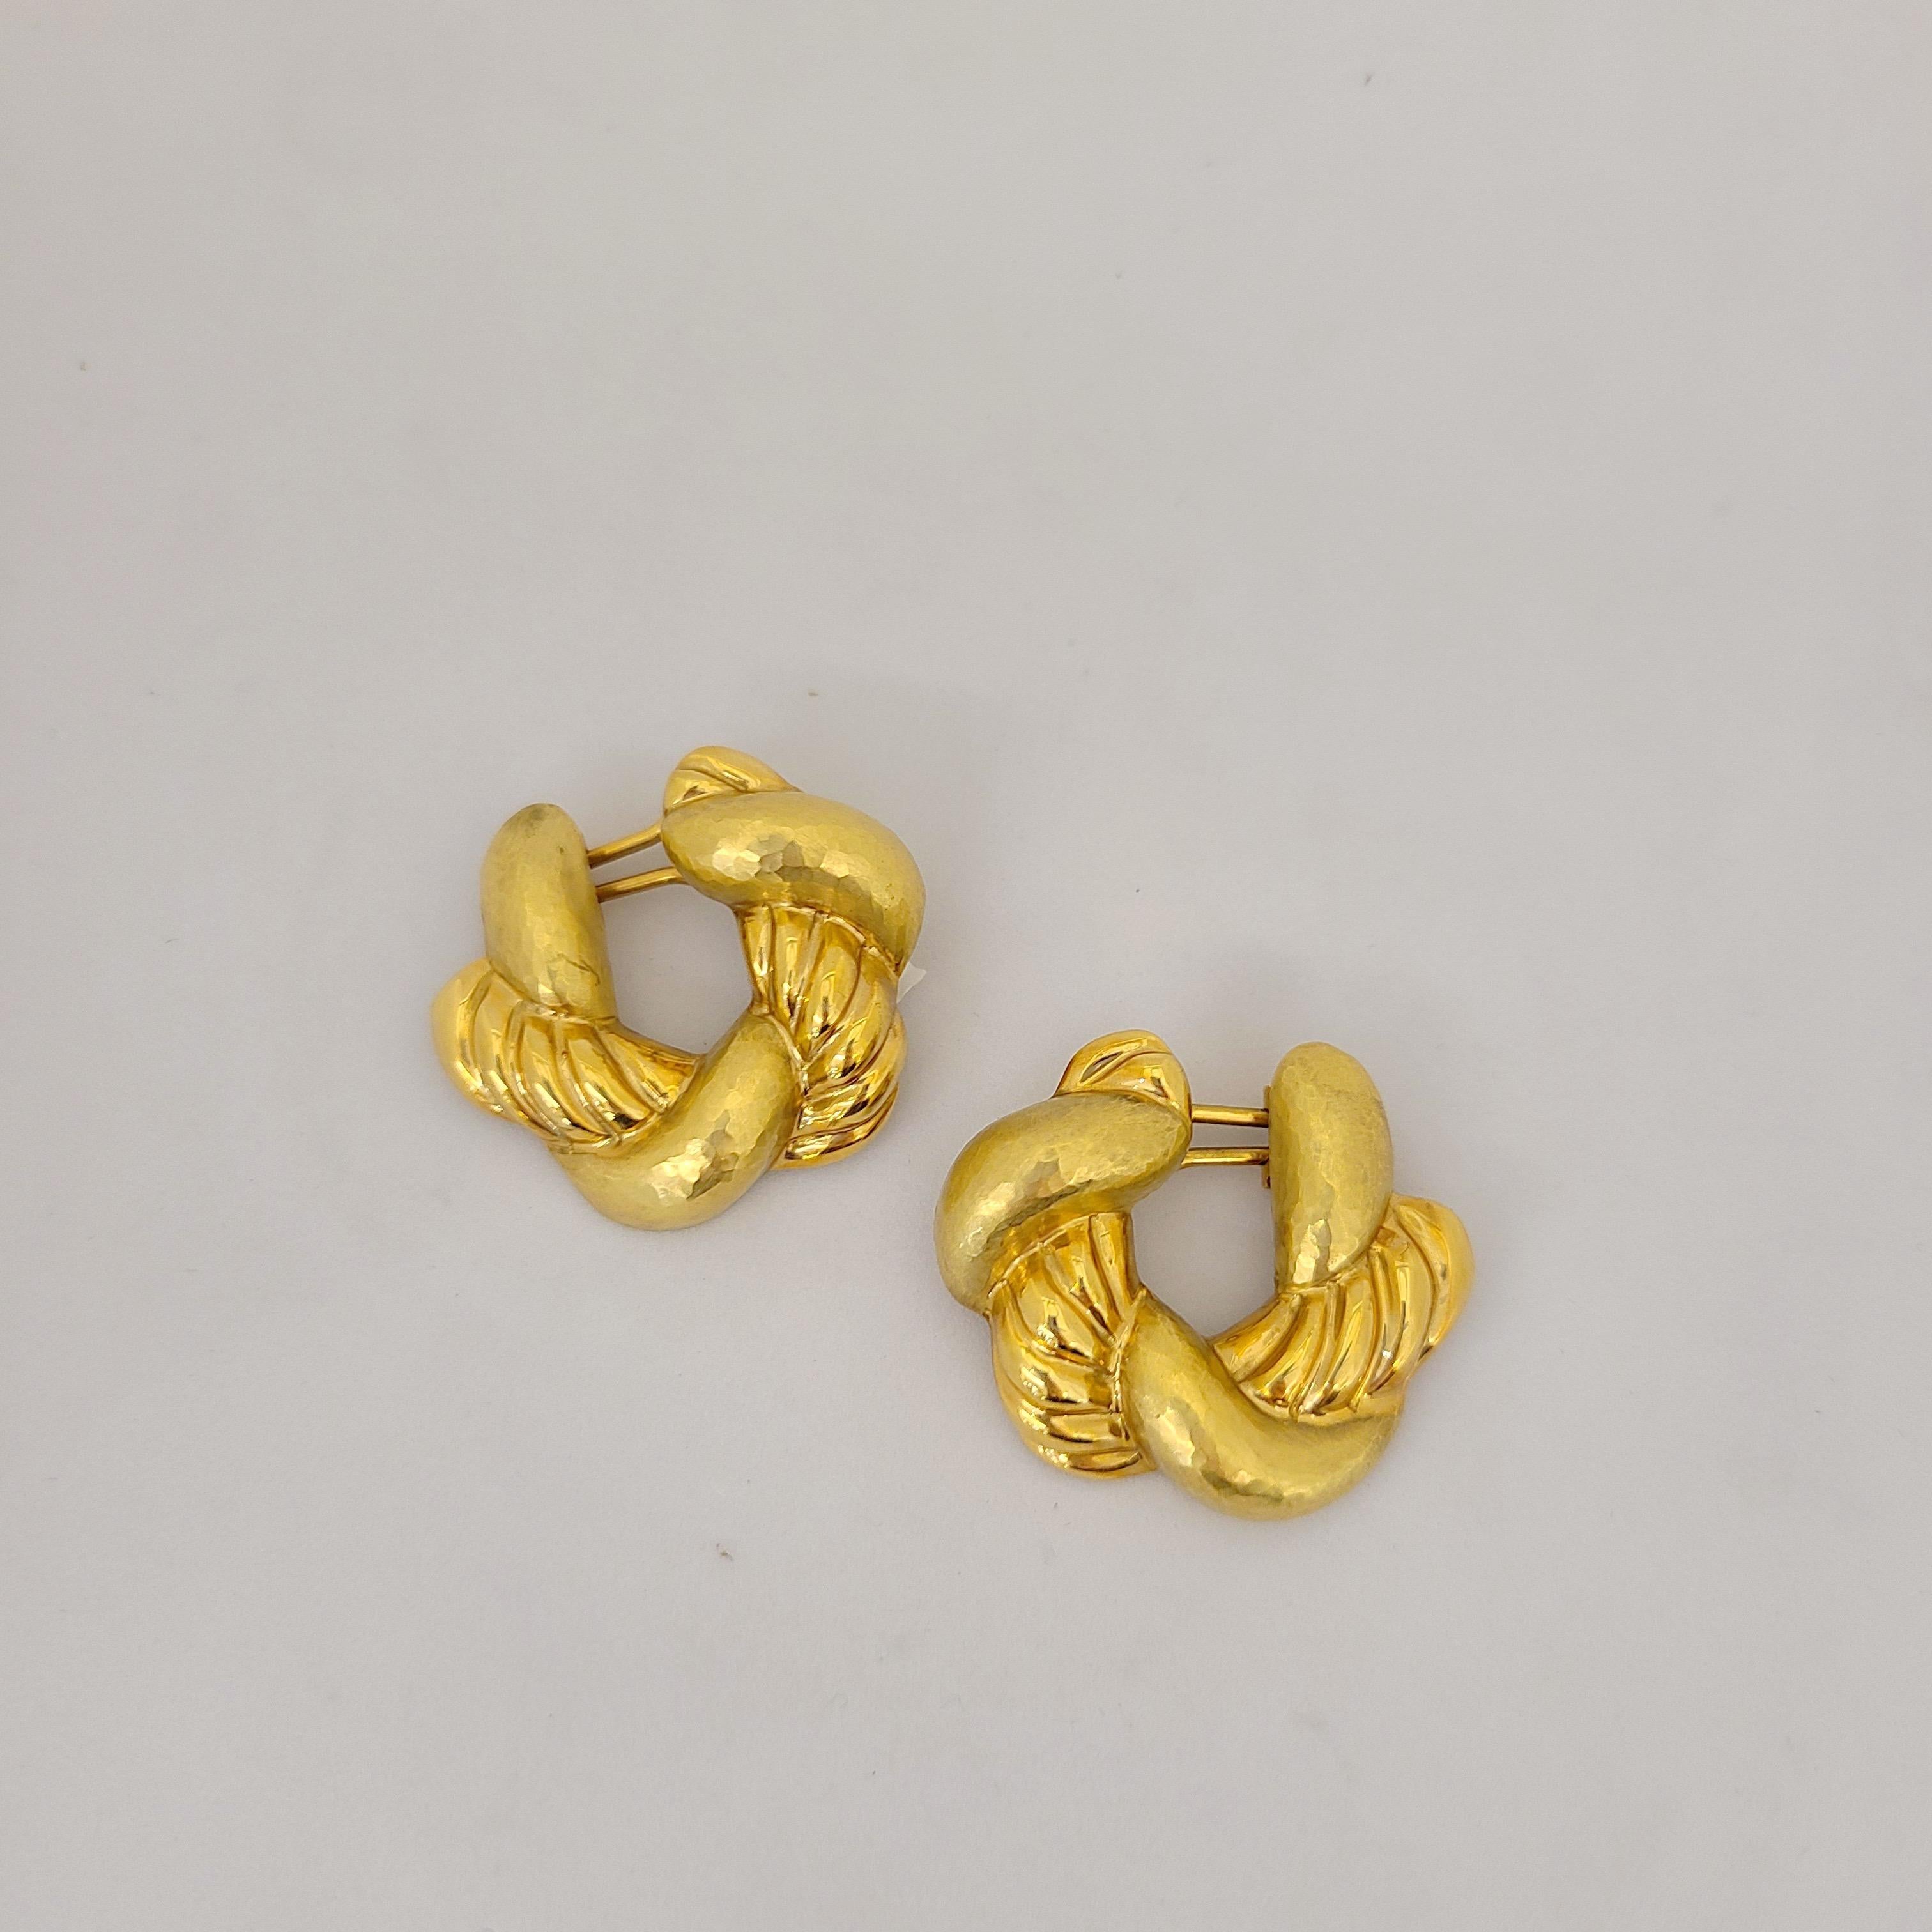 Cellini Jewelers NYC Classic and wearable 18 karat yellow gold hoop earrings are designed with a braid of alternating hammered and hi polished gold. The earrings are pierced with a french clip back. They measure 1-1/4